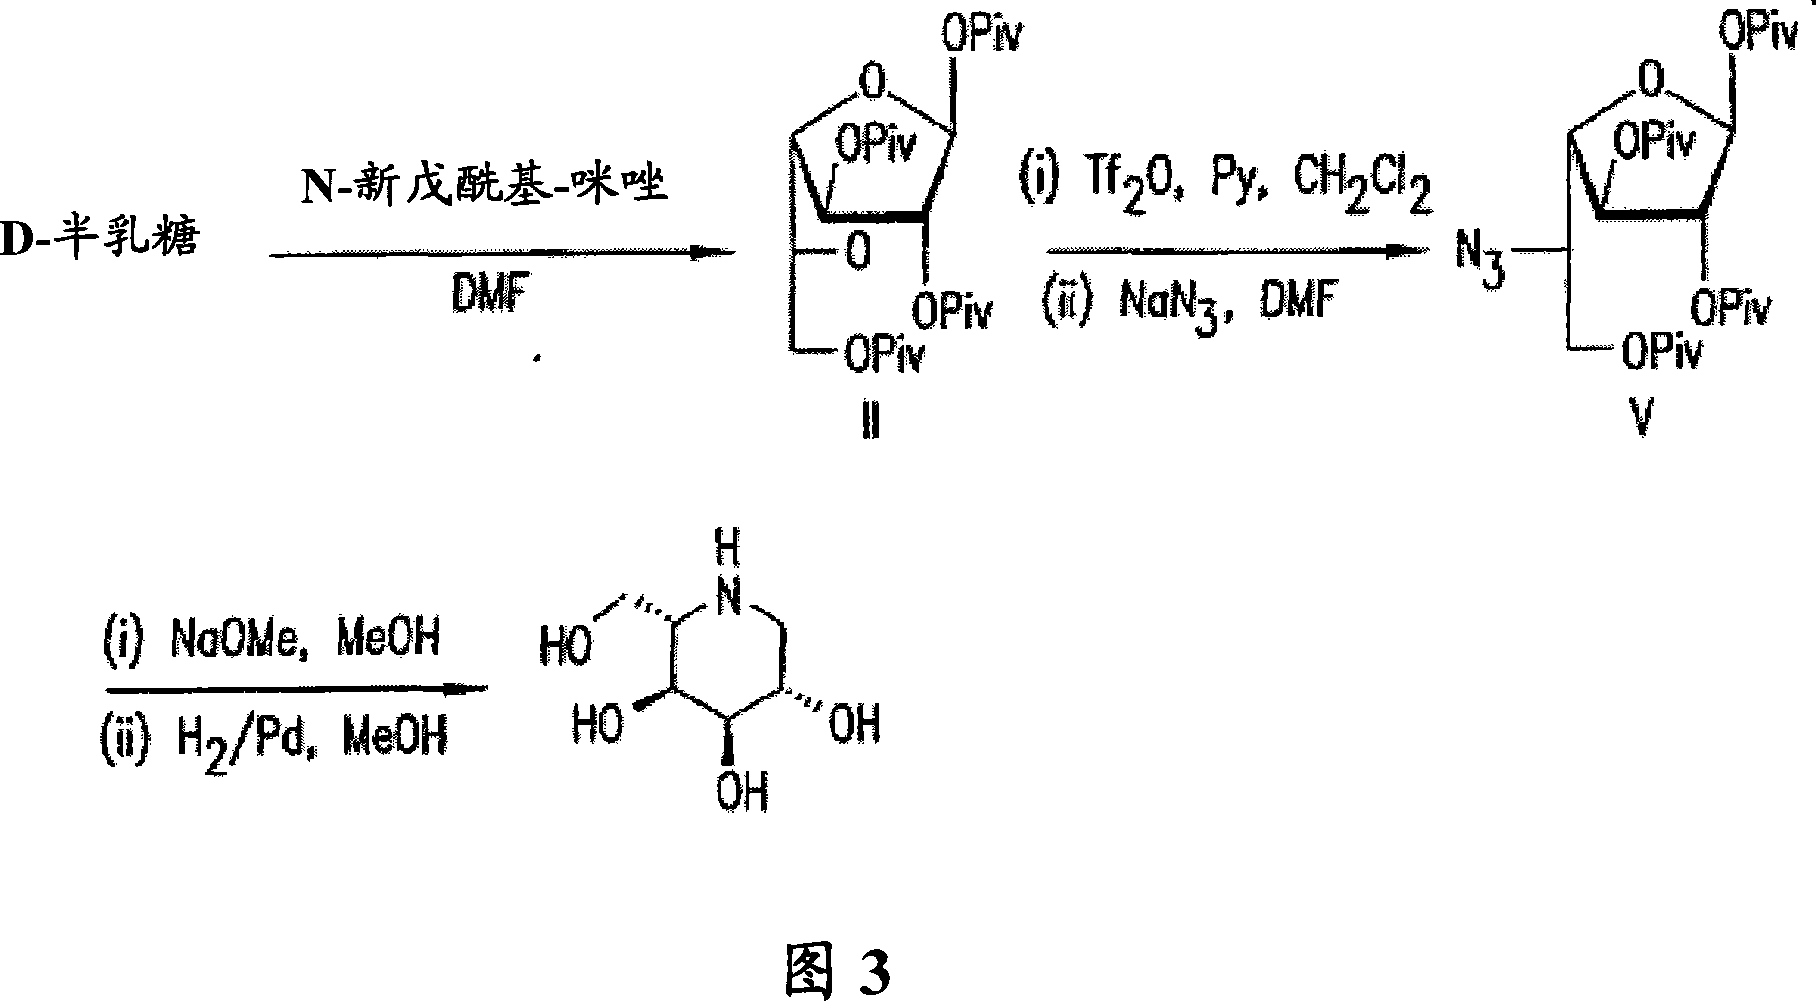 Crystalline sugar compositions and method of making